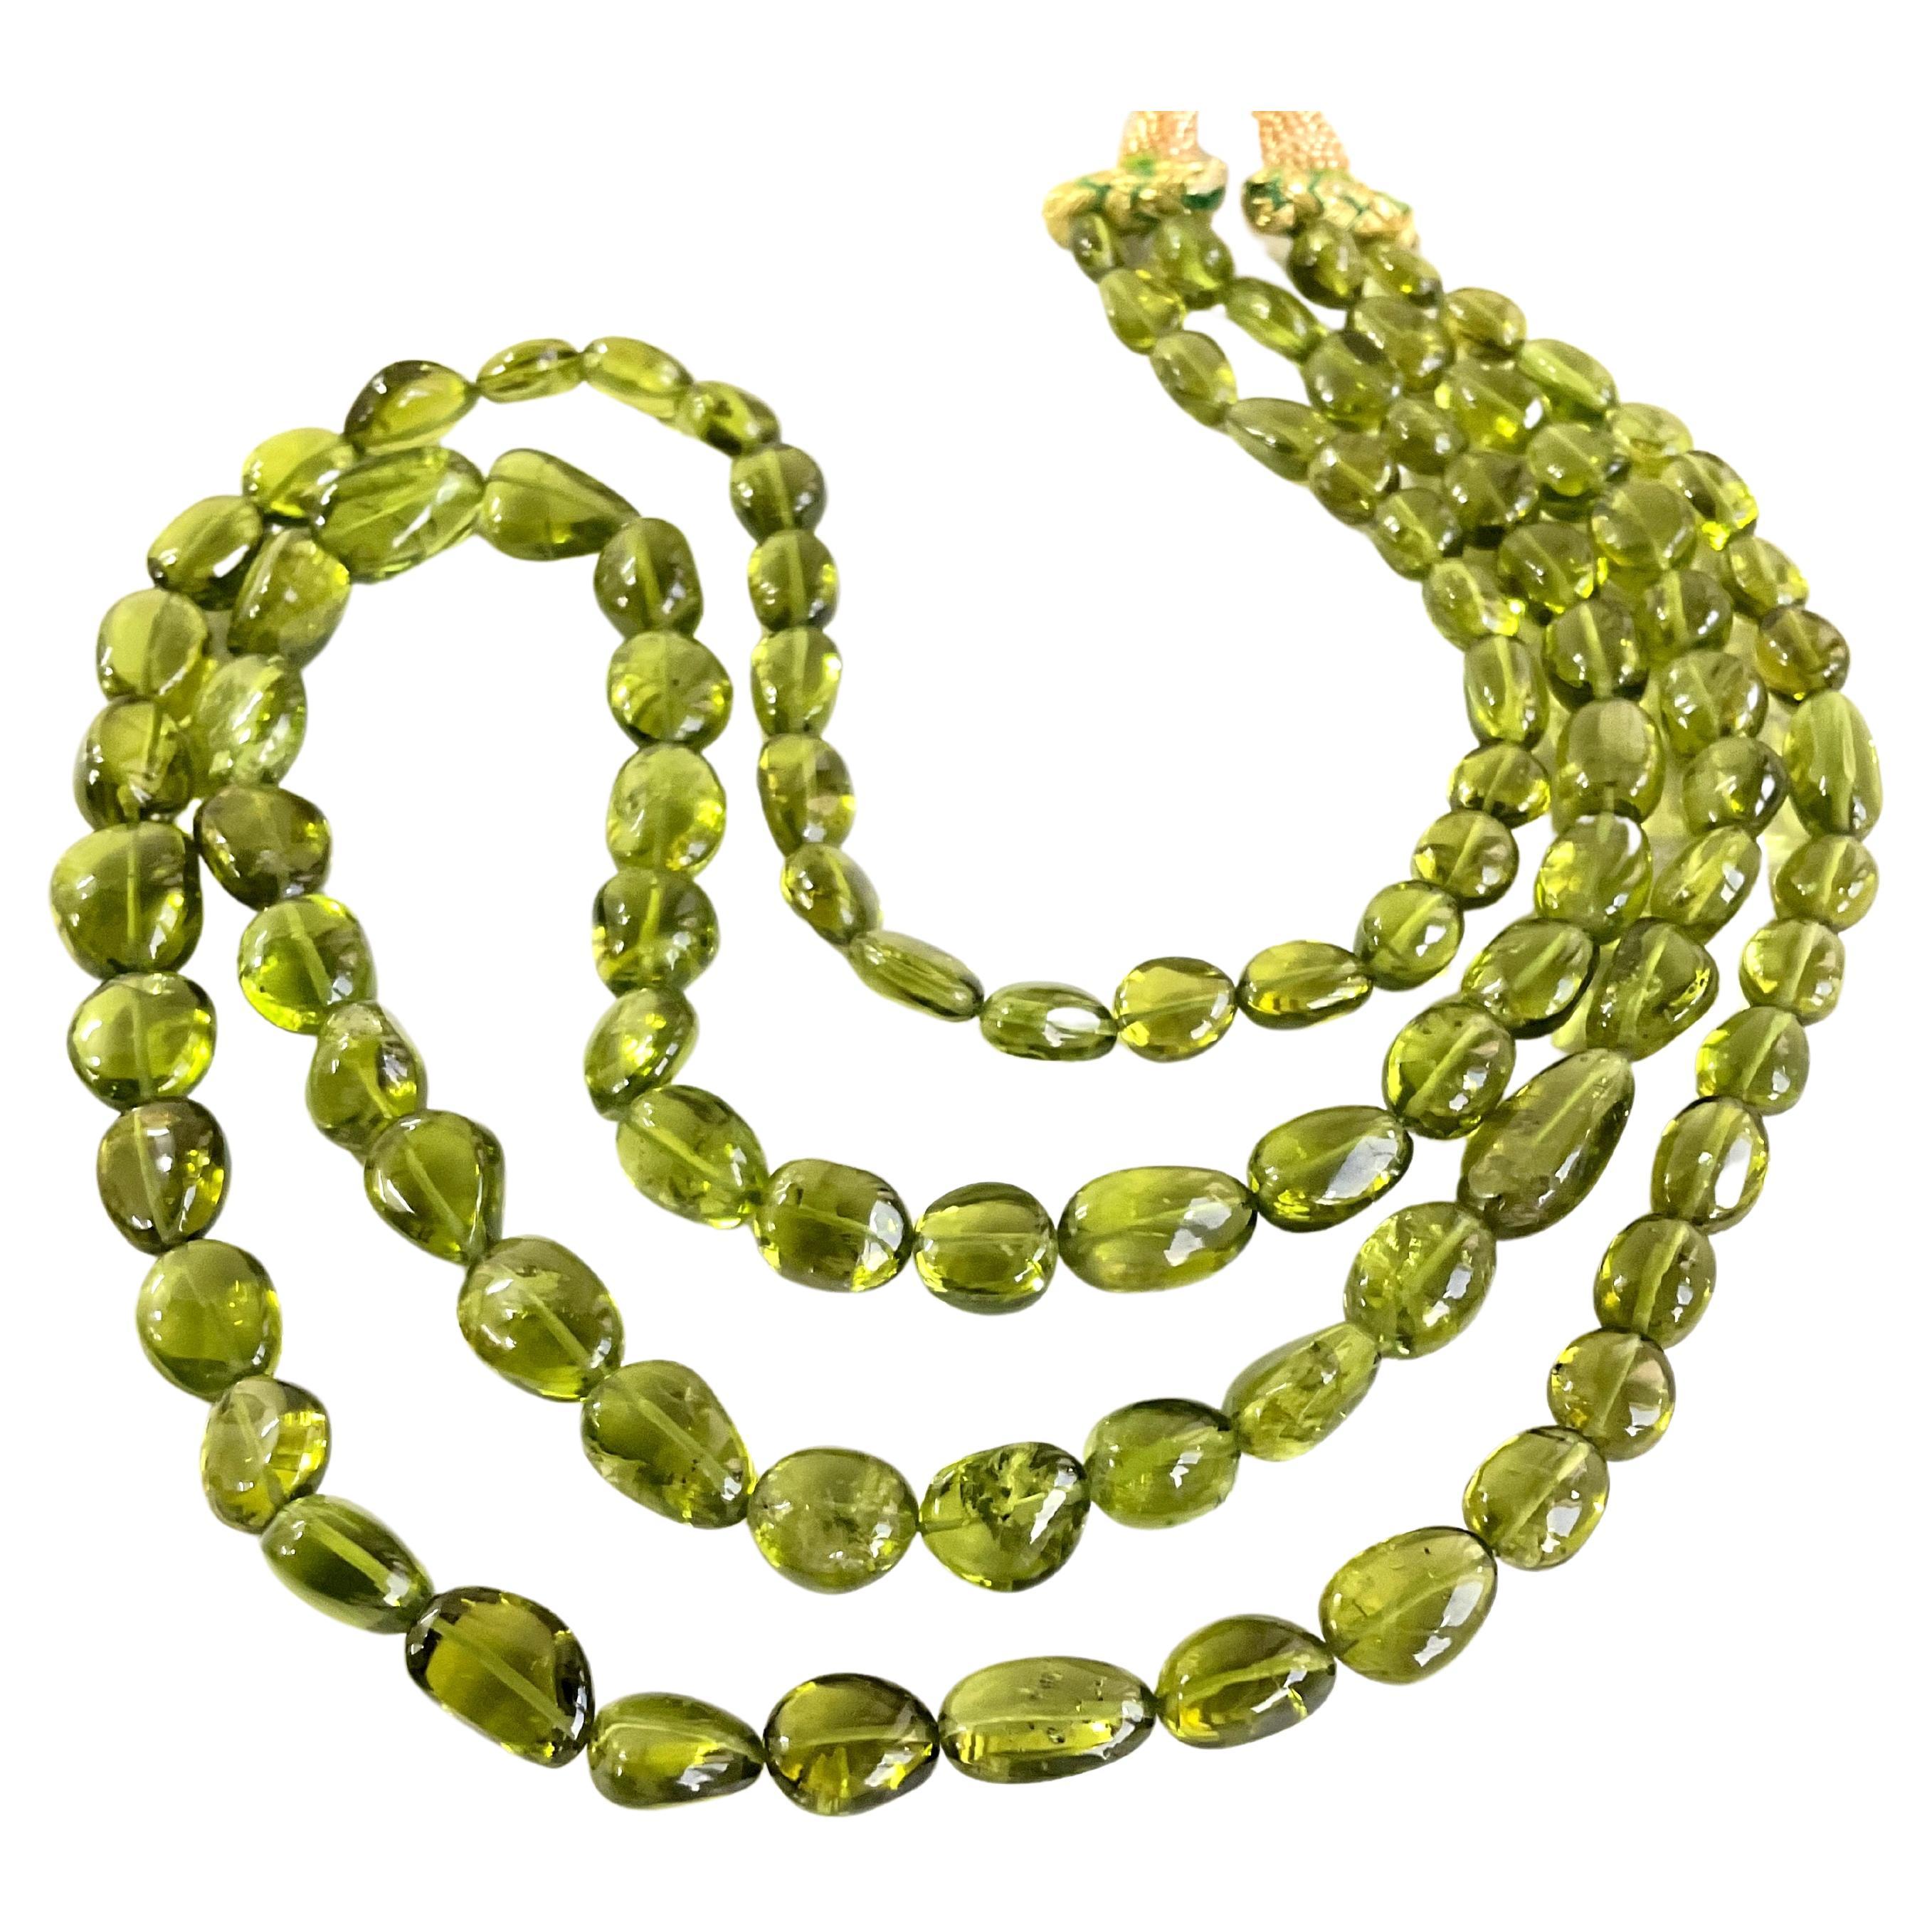 Top Quality Peridot Plain Tumbled Natural Gemstone Necklace 
Size : 6x7 To 13x10 Beads
Weight : 387.70 Carats
Strand - 2 Line